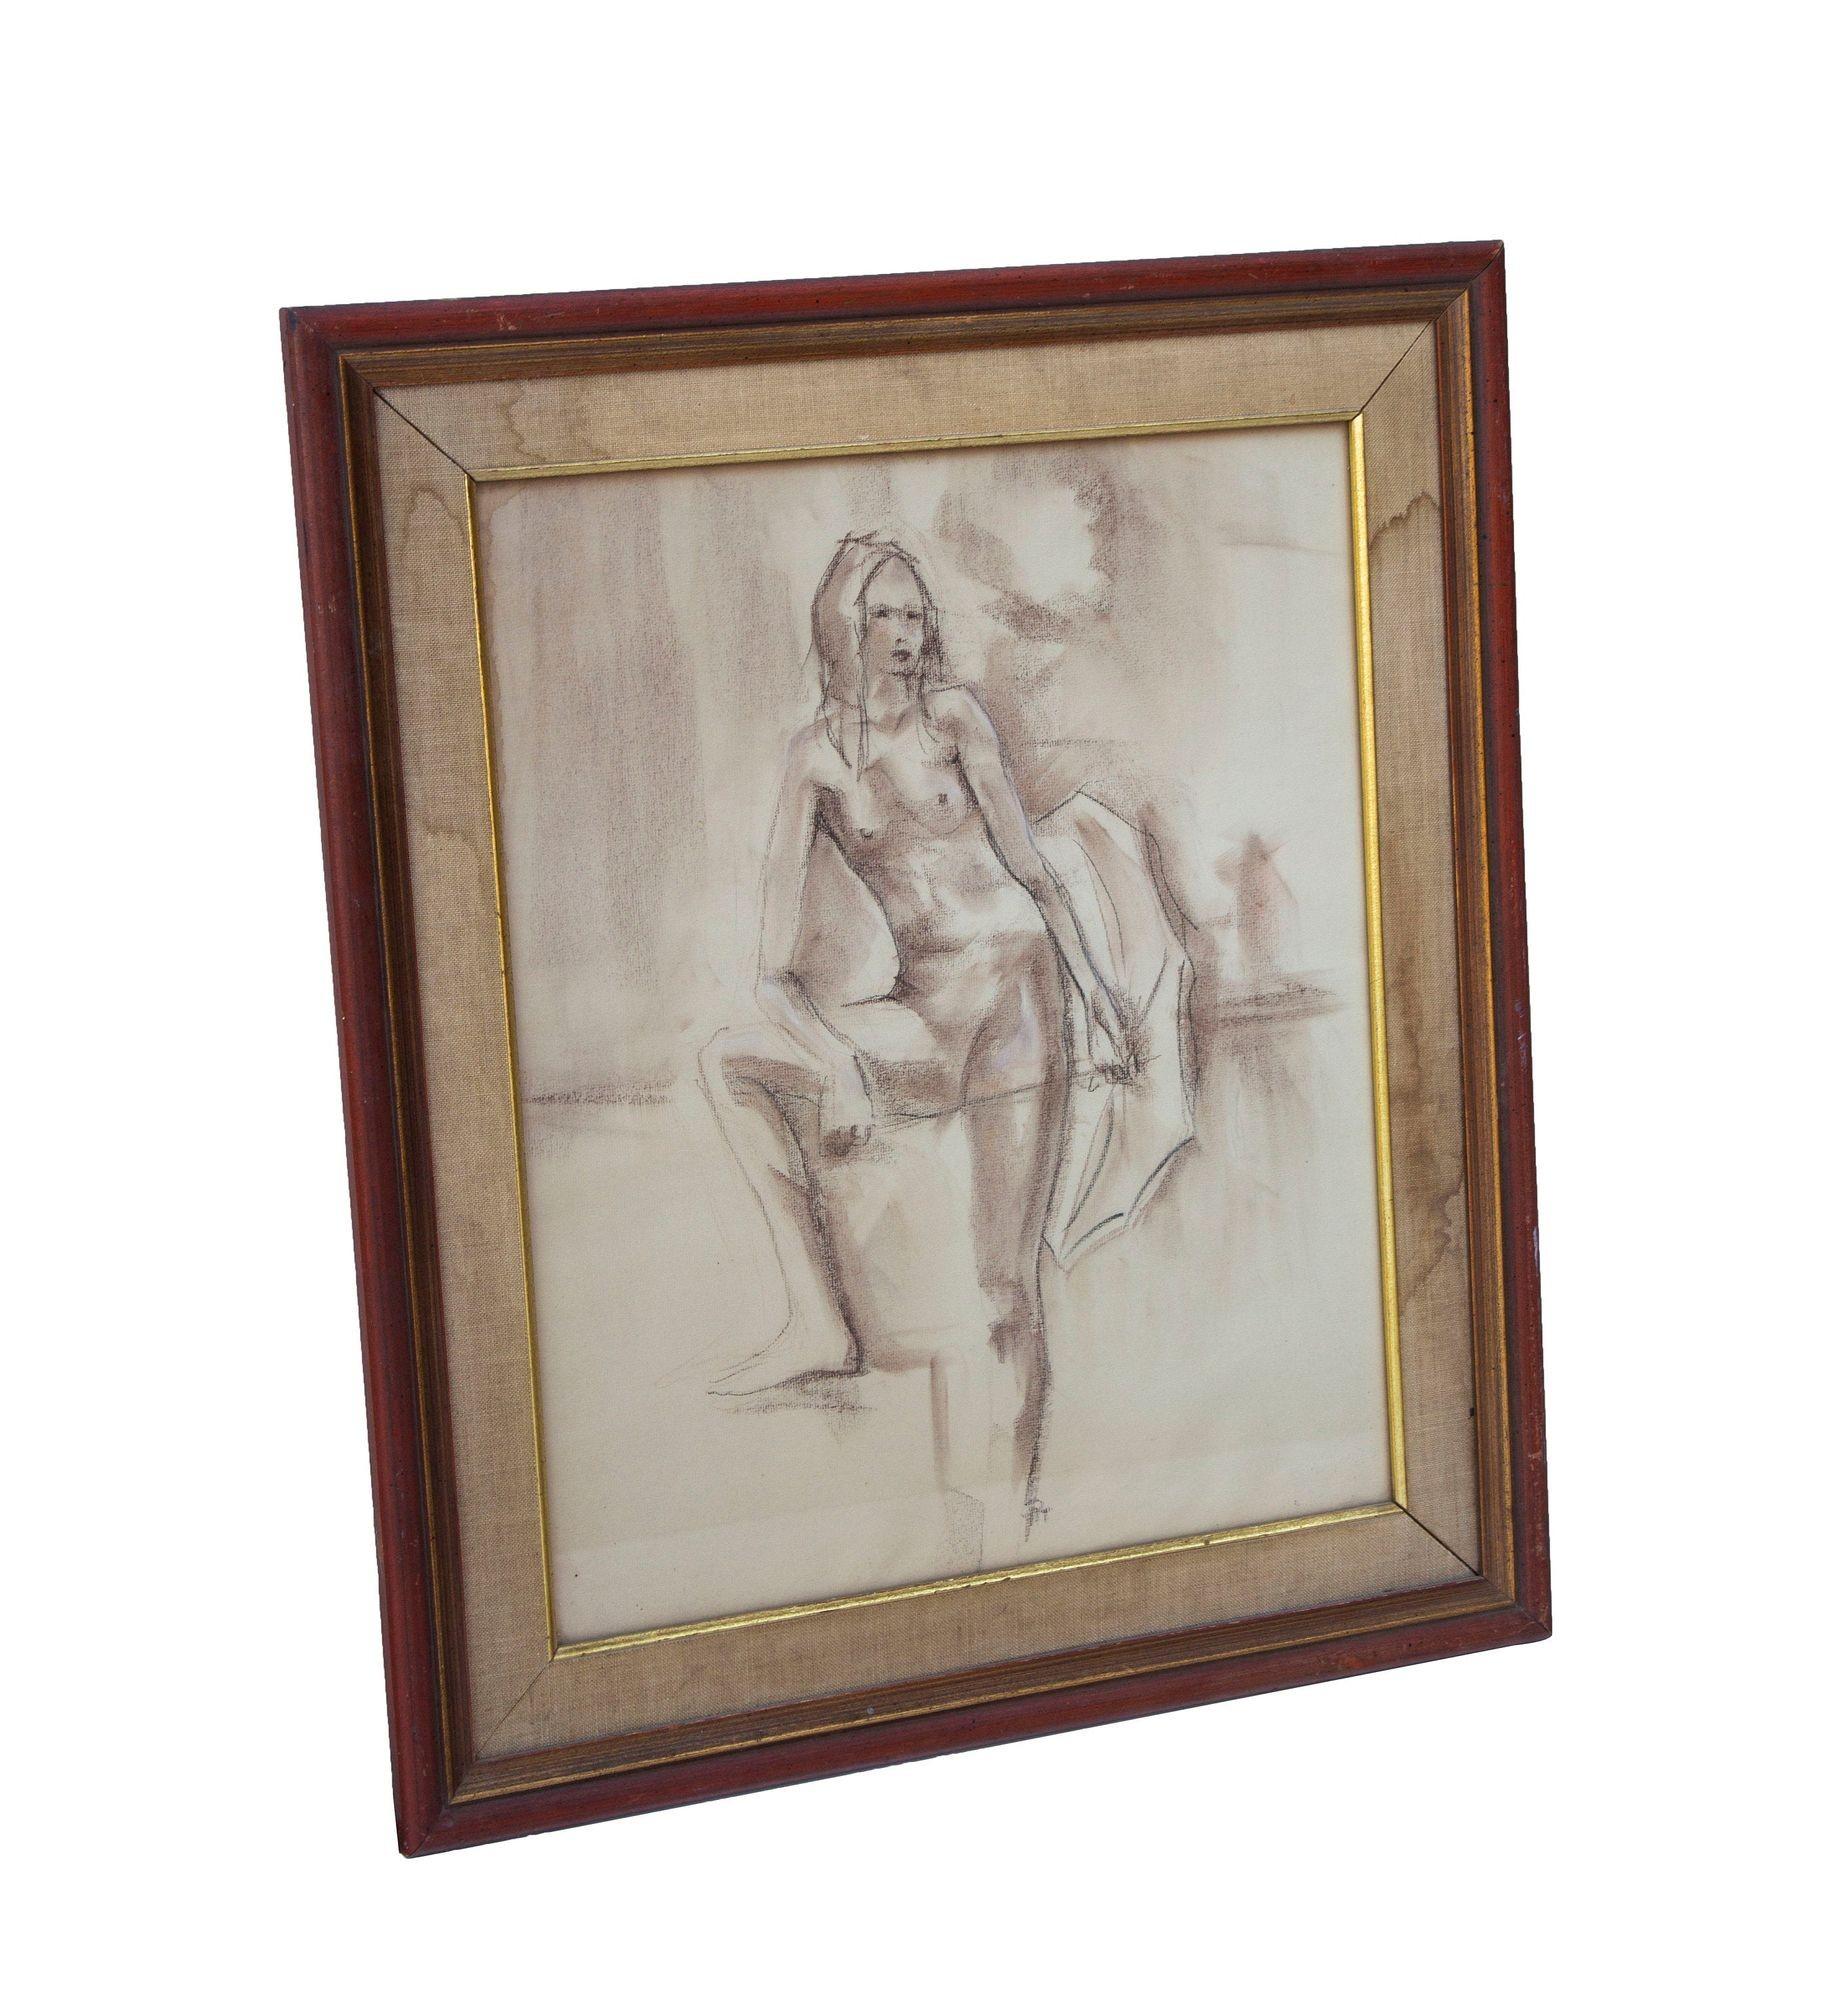 USA, 1970s
Full length female nude in conte crayon. The frame is in burnt sienna with a gilt inner edge and a natural linen matte. Illegible signature. Ready to hang. CONDITION NOTES: Some water marks to the linen matte and light marks to the